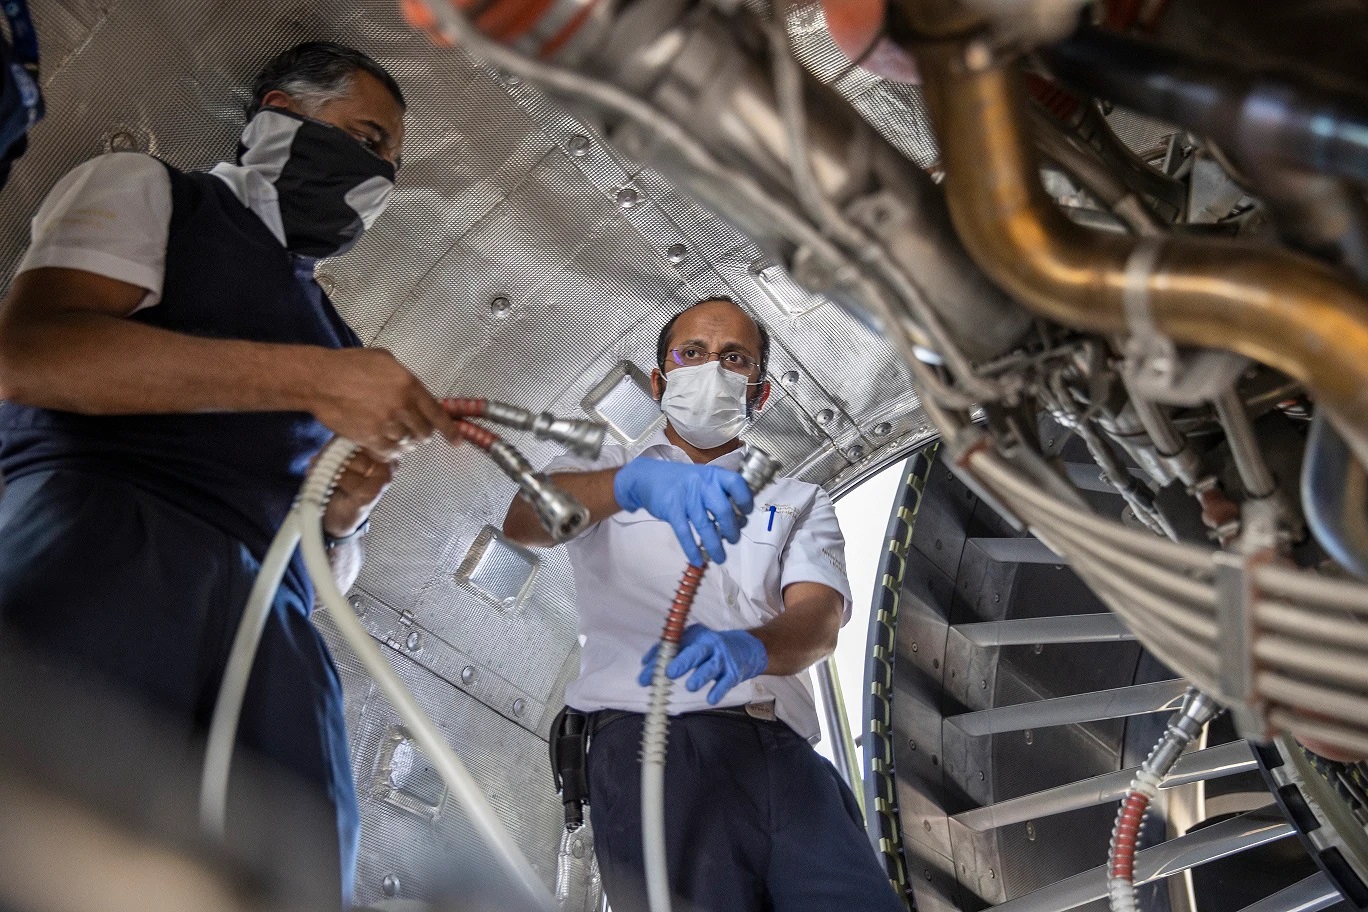 Etihad Airways has partnered with GE Aviation to launch GE’s 360 Foam Wash jet engine cleaning system. The Abu Dhabi-based airline will use GE’s 360 Foam Wash on the GE90 and GEnx-1B engines of Etihad’s Boeing 777 and 787 fleets. Click to enlarge.